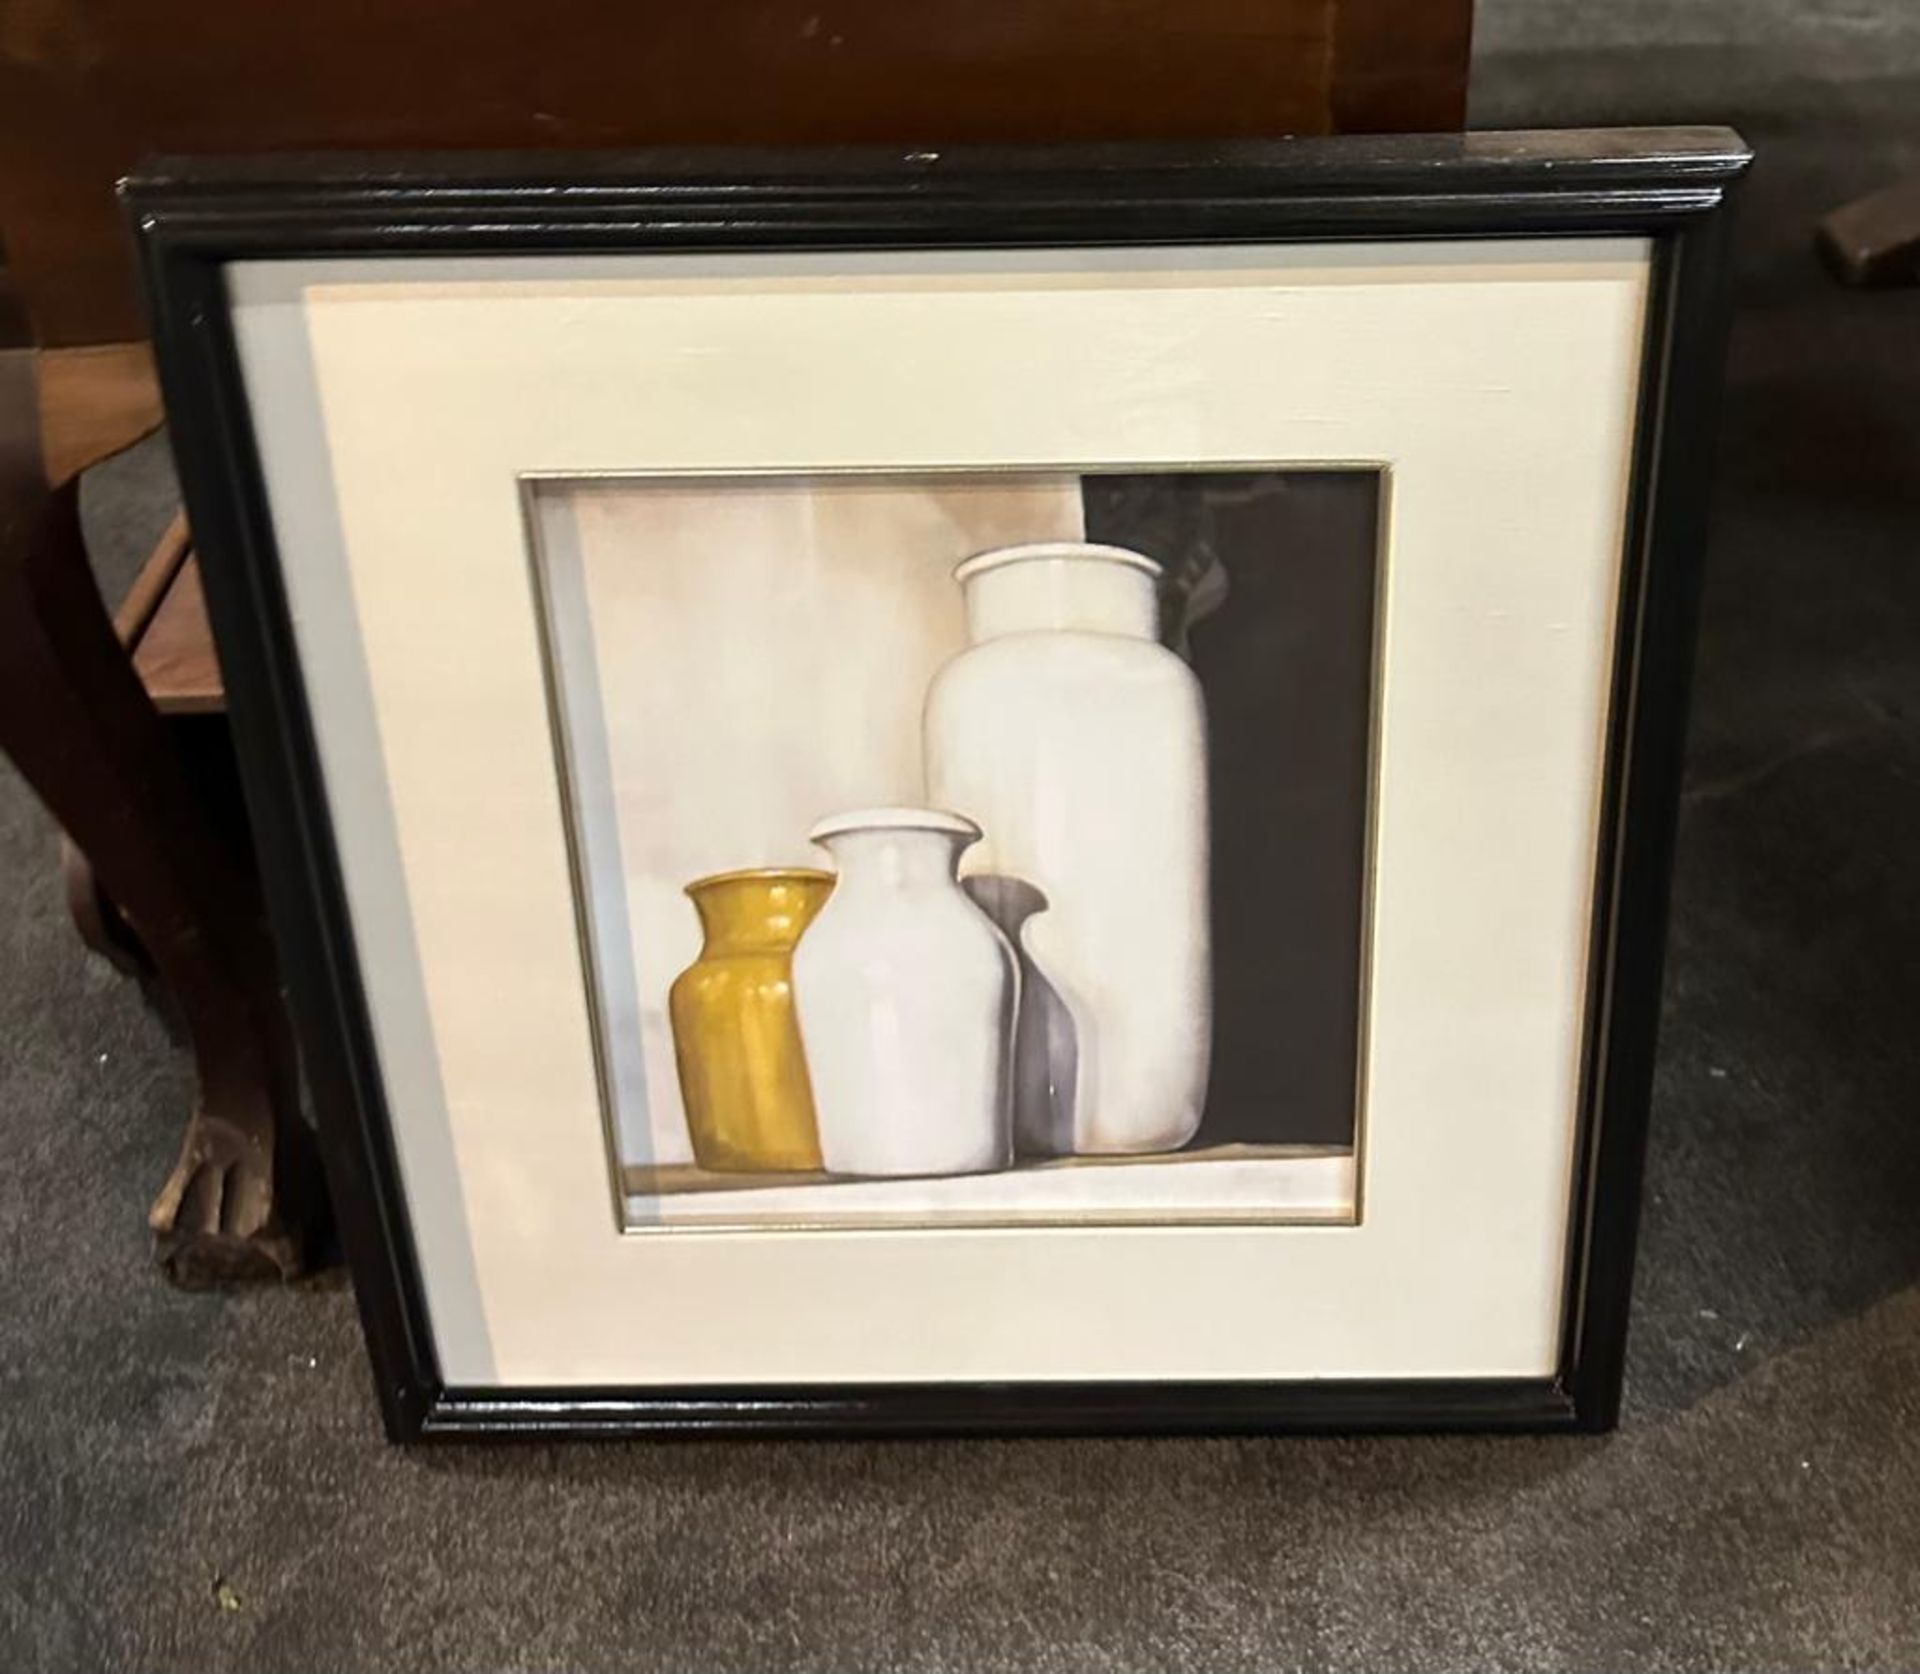 3 x Untitled Framed Still Life Lithograph Prints 60 x 50cm - Image 2 of 2